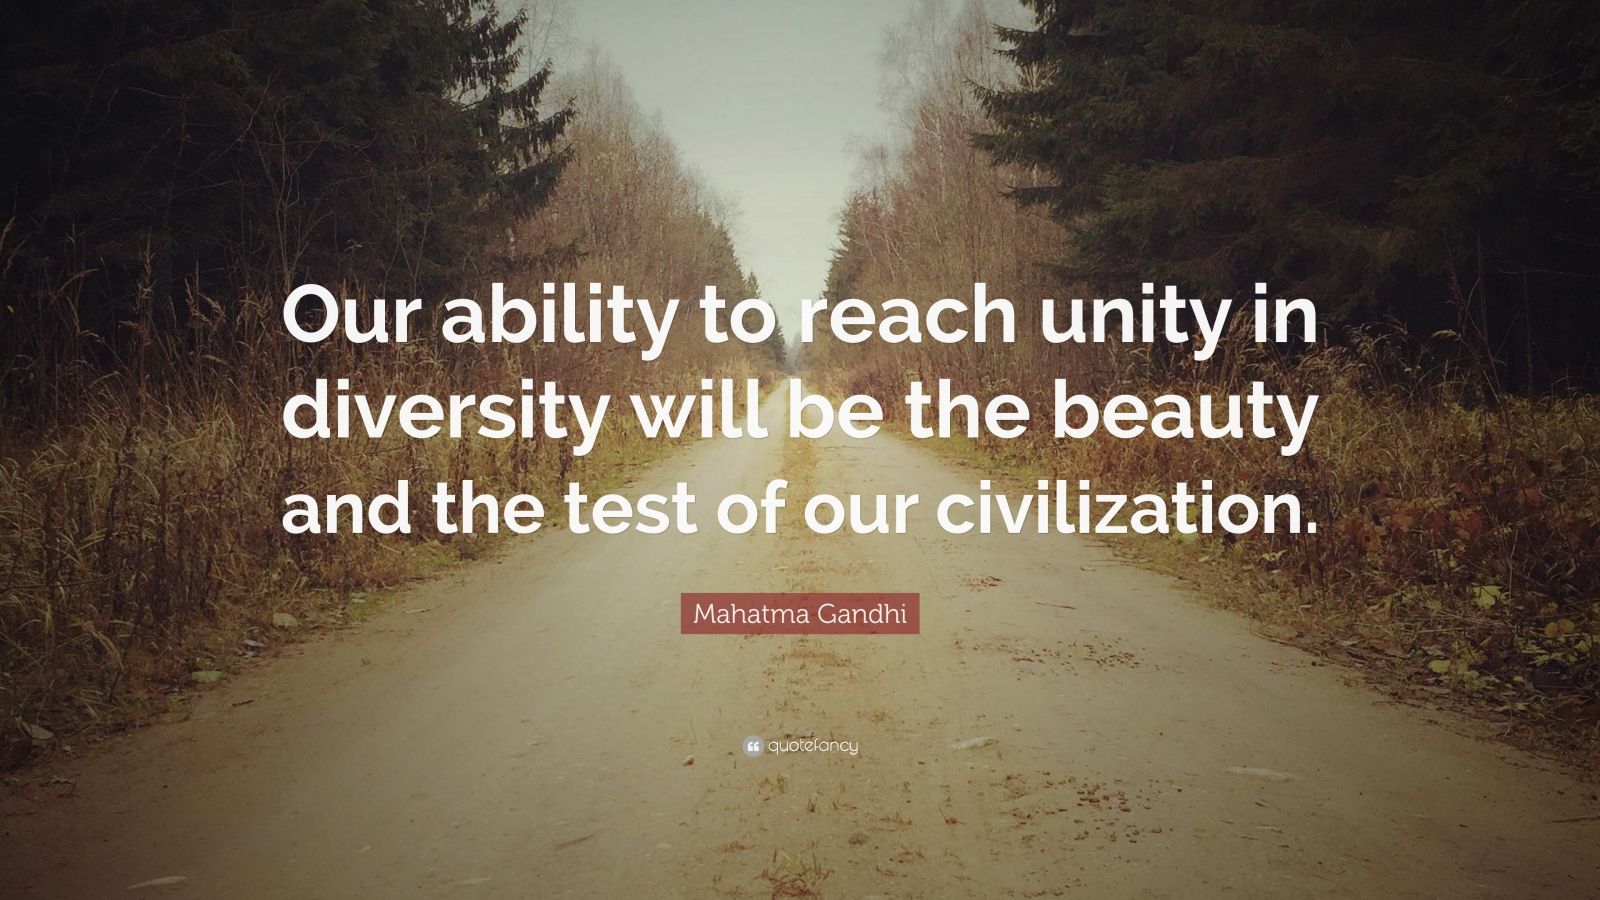 Mahatma Gandhi Quote: “Our ability to reach unity in diversity will be